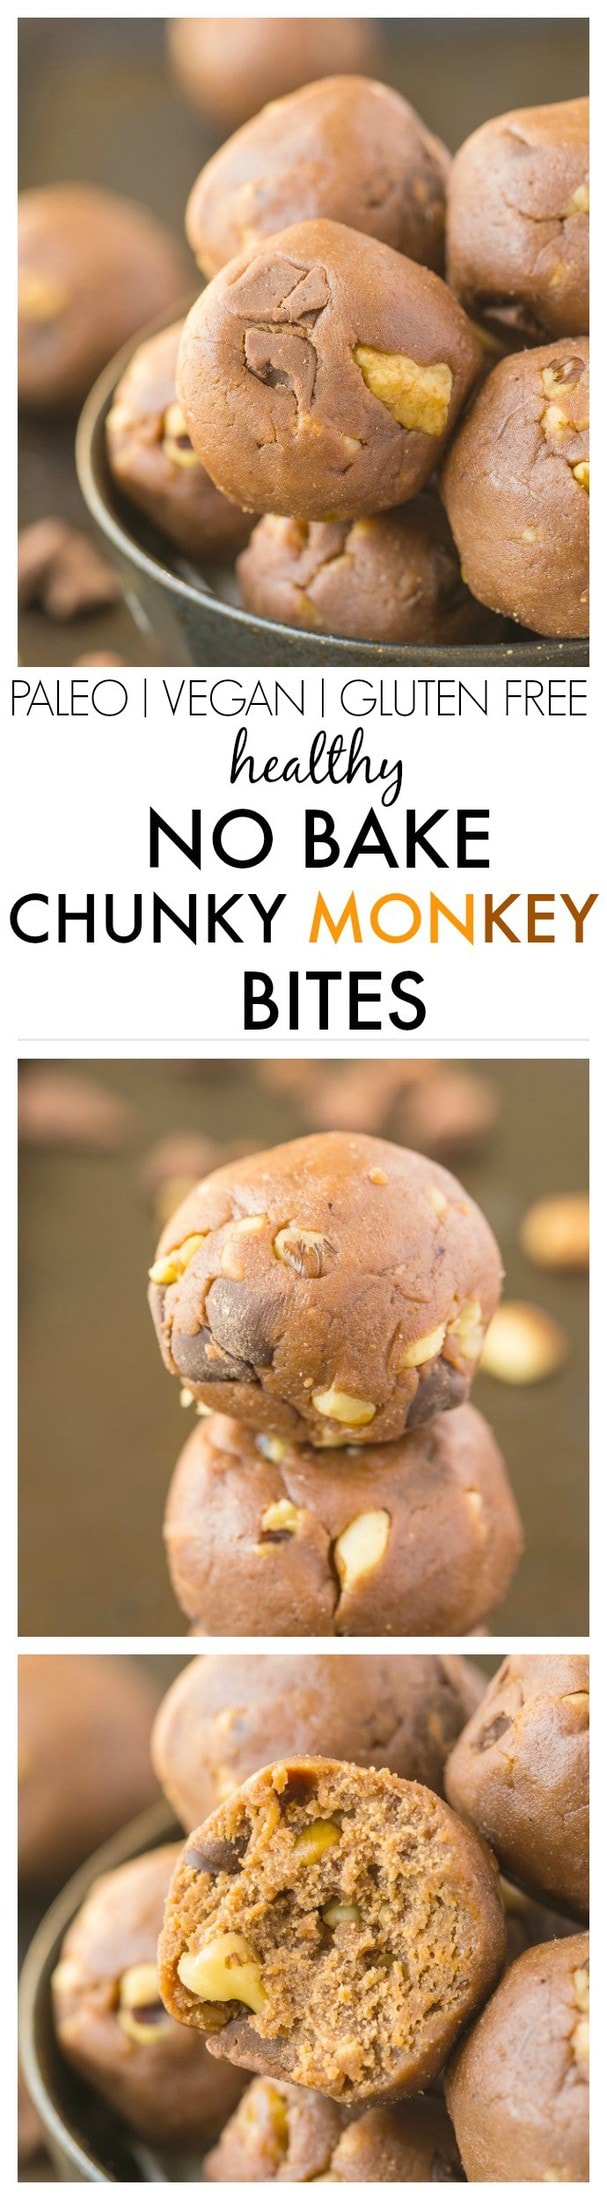 No Bake Chunky Monkey Bites which are the perfect snack recipe which tastes anything but healthy- But they are! Ready in 5 minutes! {vegan, gluten free, paleo, high protein recipe}